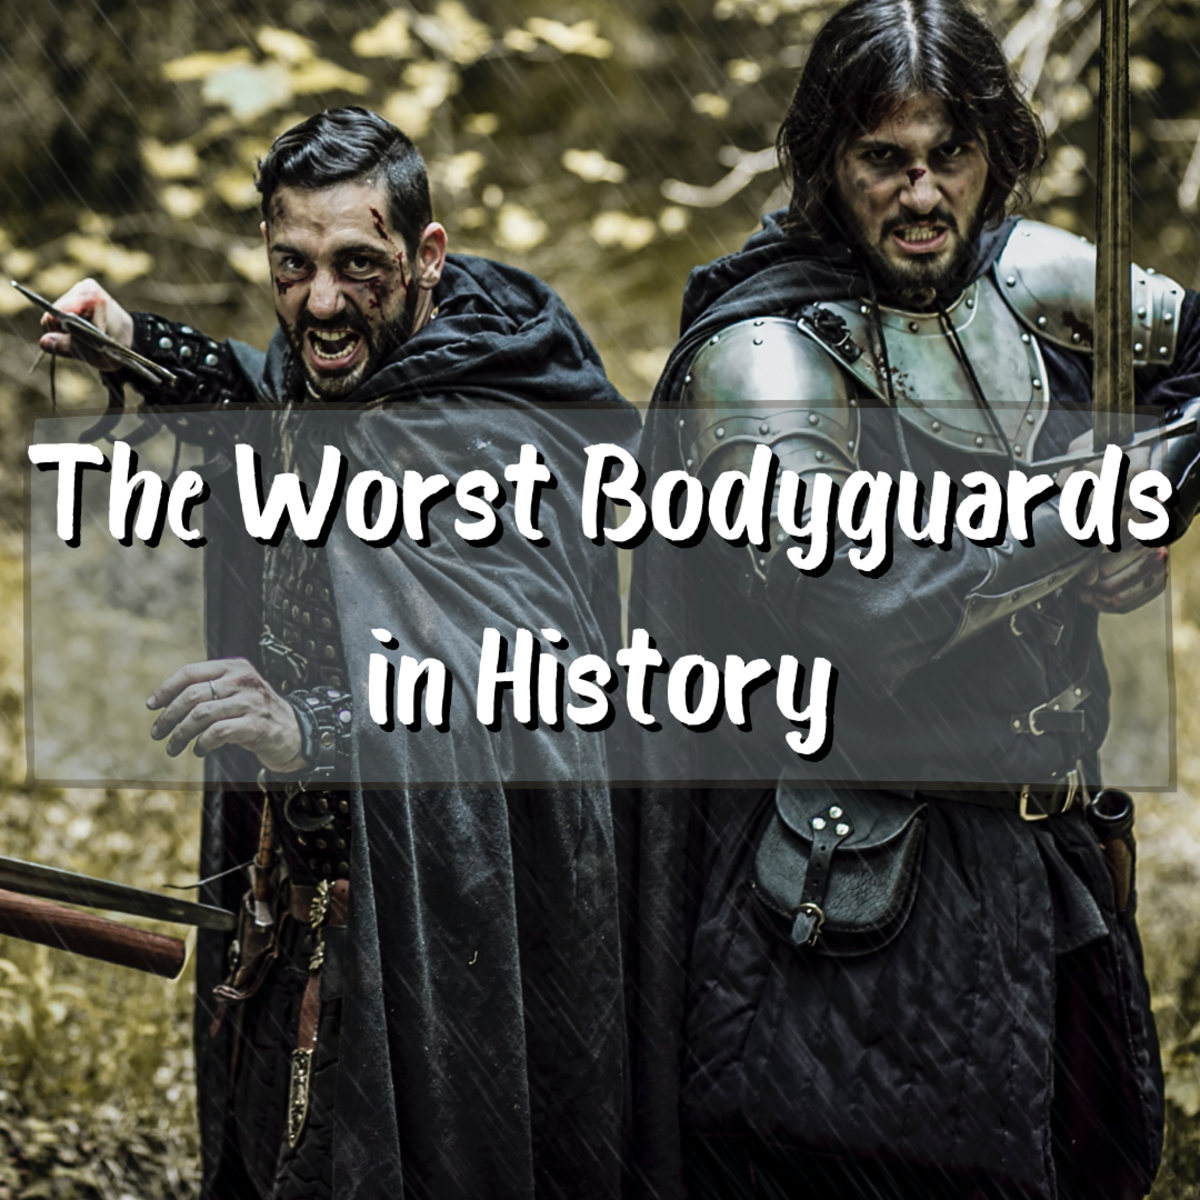 Read on to learn about some of the worst bodyguards in history, including the Praetorian Guard, the Janissaries, and the Streltsy.